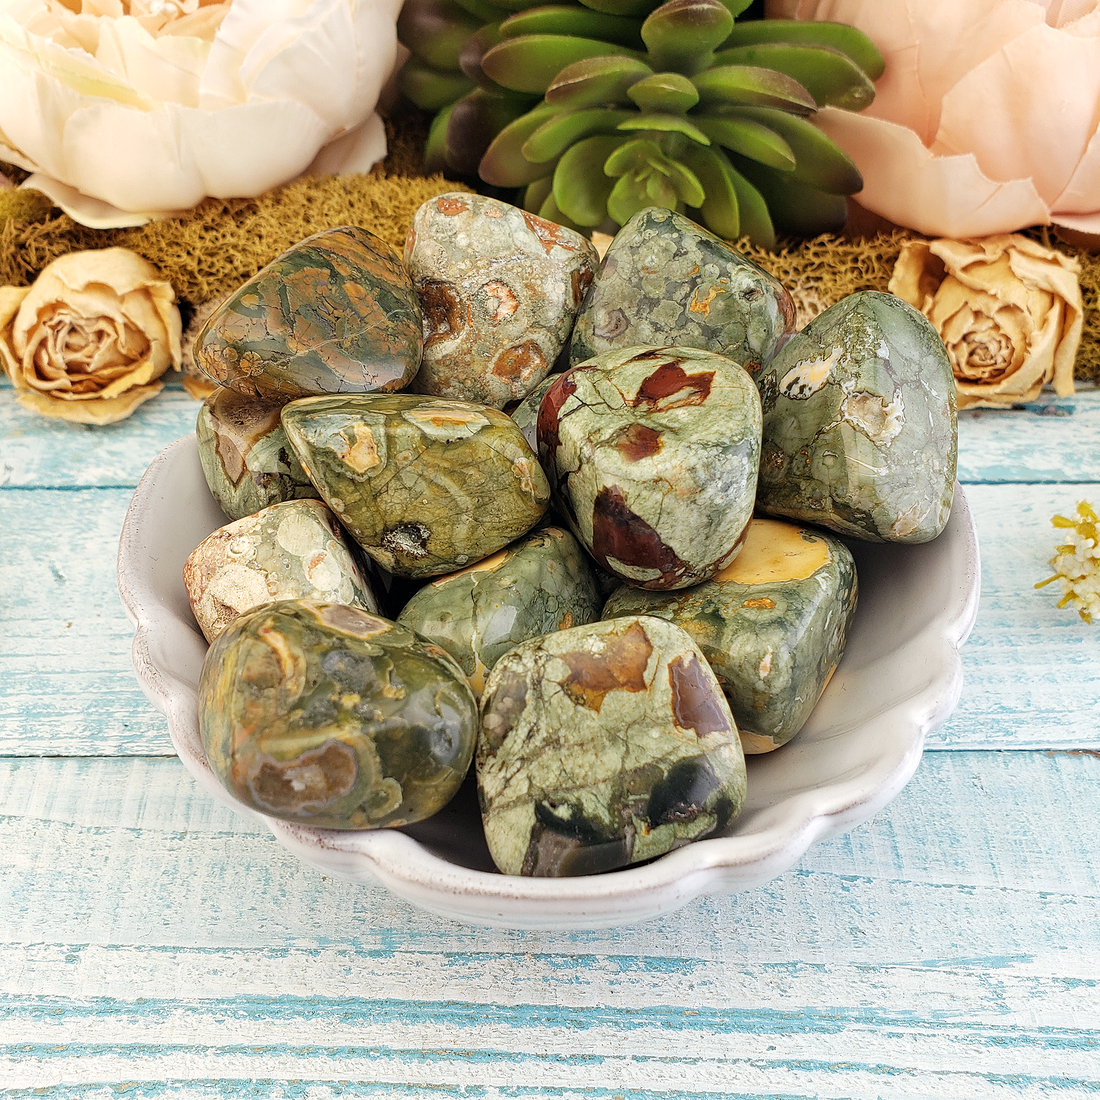 Green Rainforest Rhyolite Natural Tumbled Stone - One Stone - In White Bowl